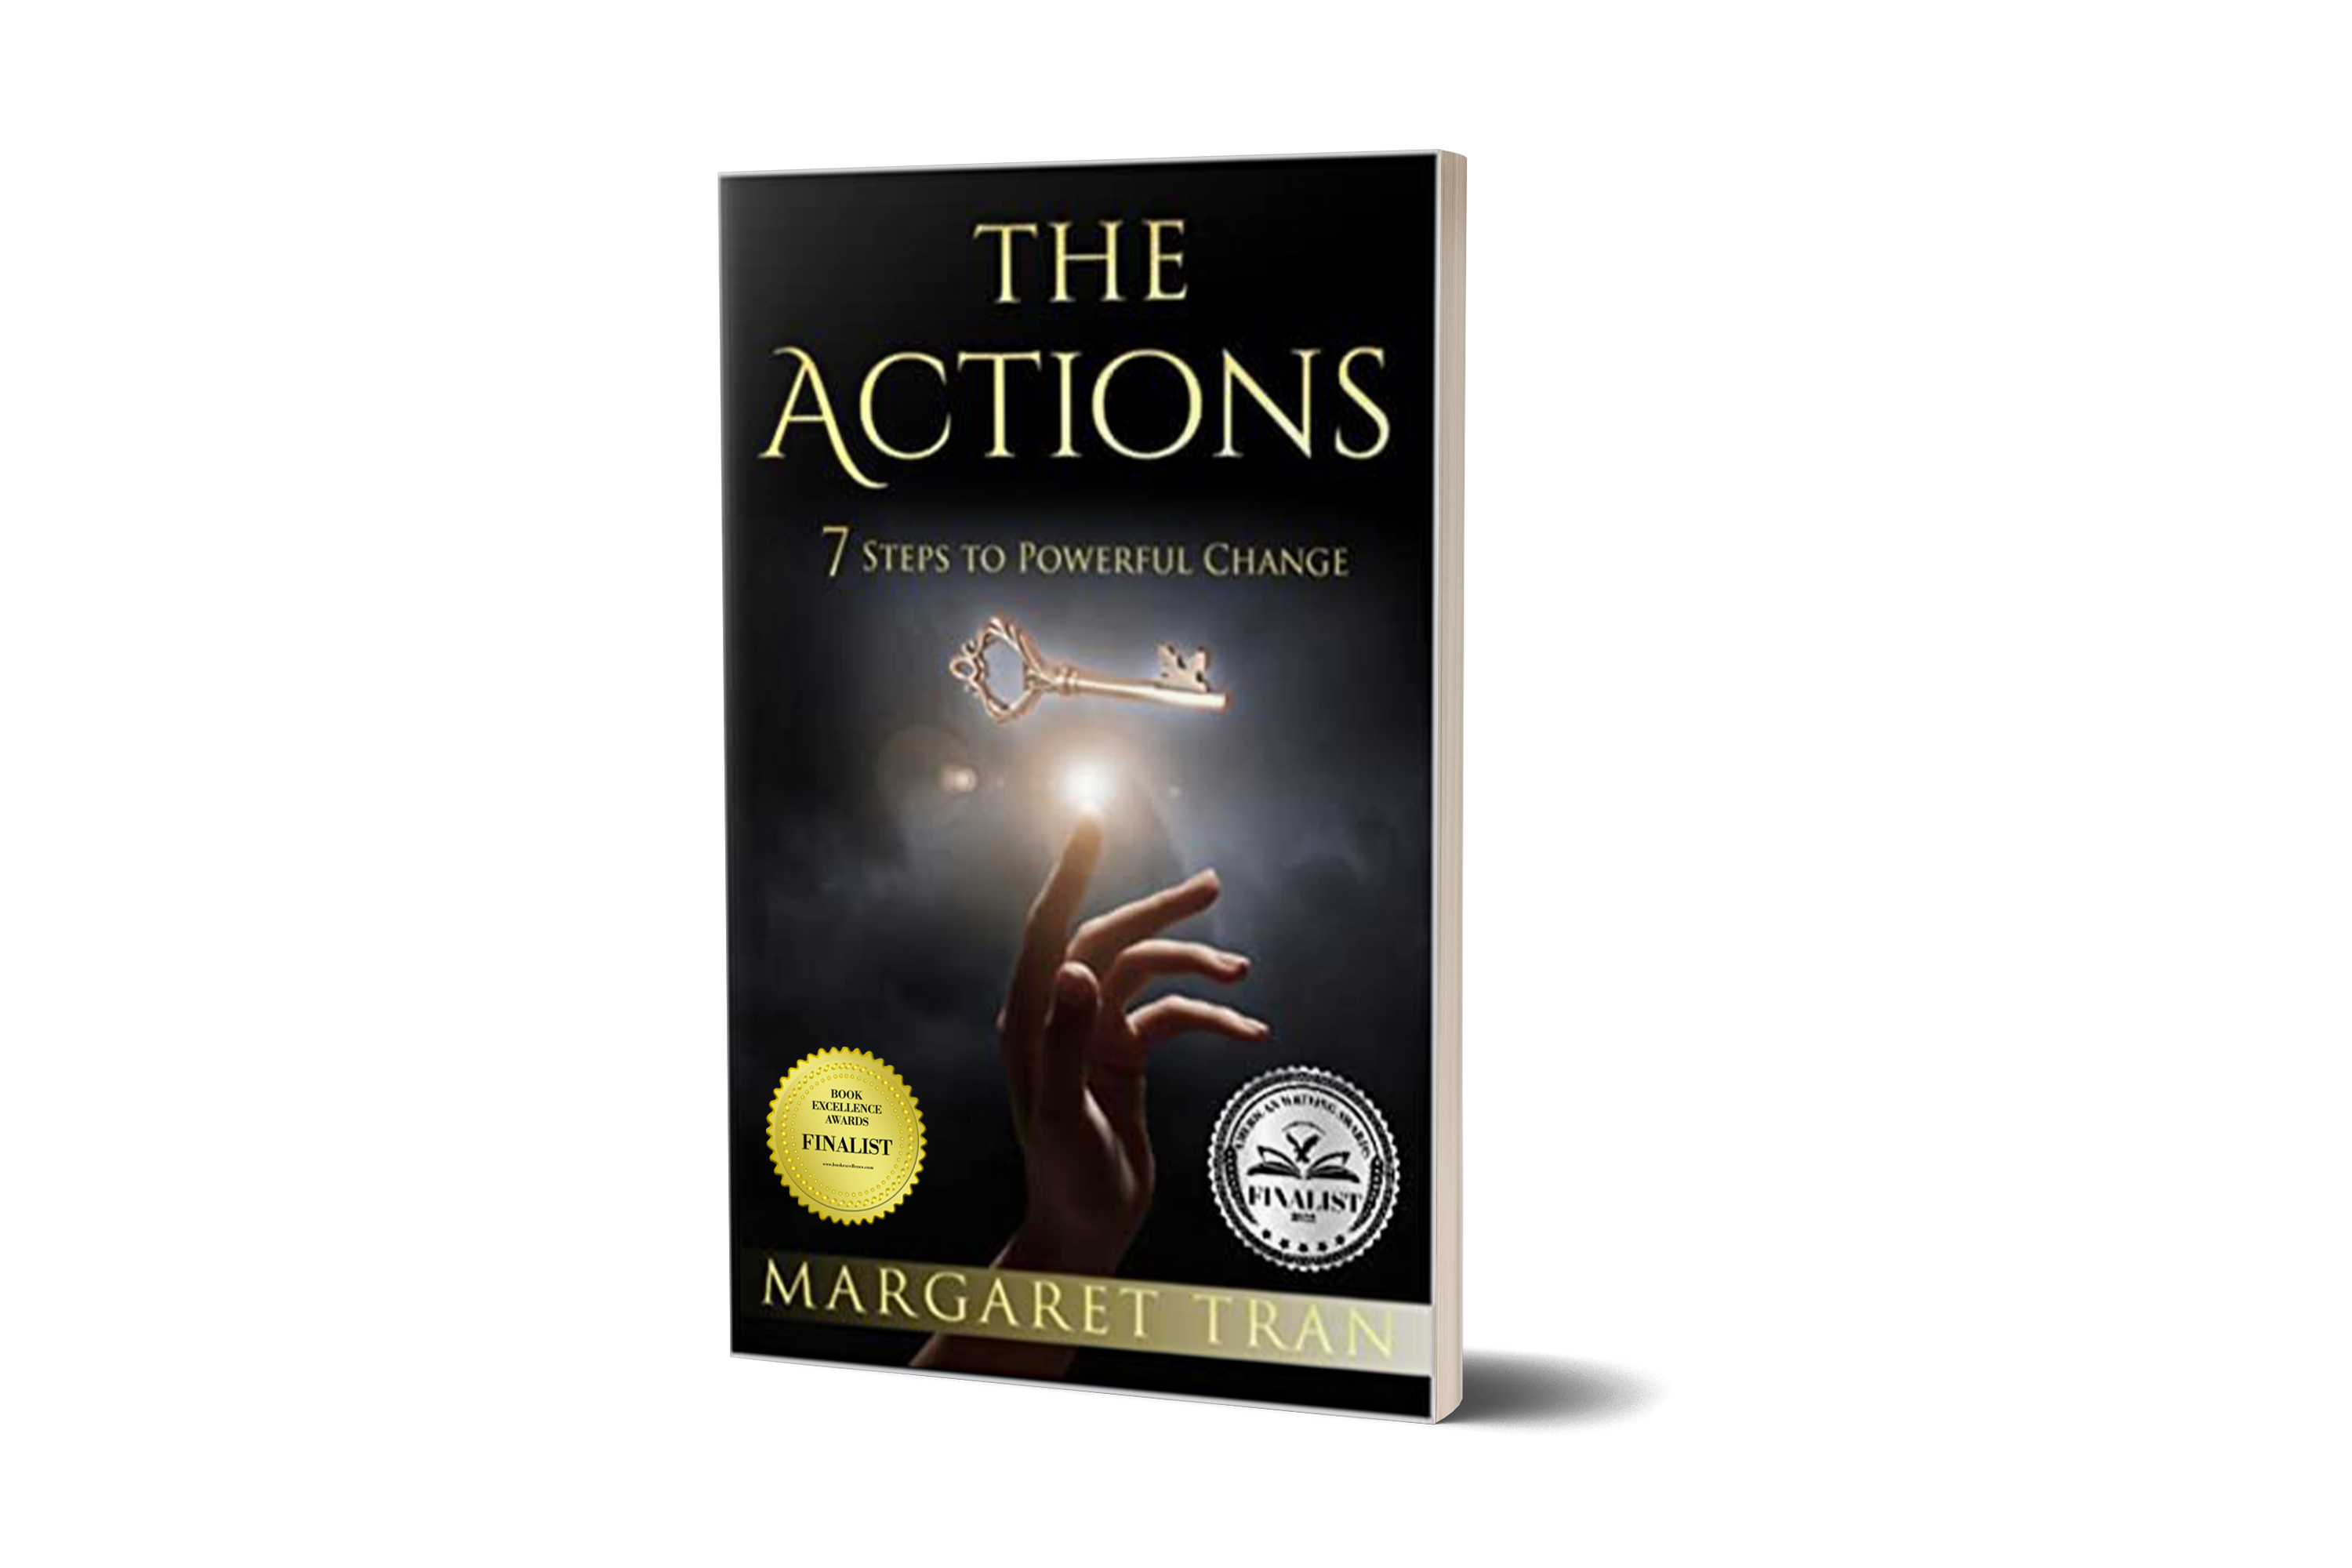 Margaret Tran’s, The ACTIONS Offers a Powerful Framework on How to Break Bad Habits and Build Better Ones